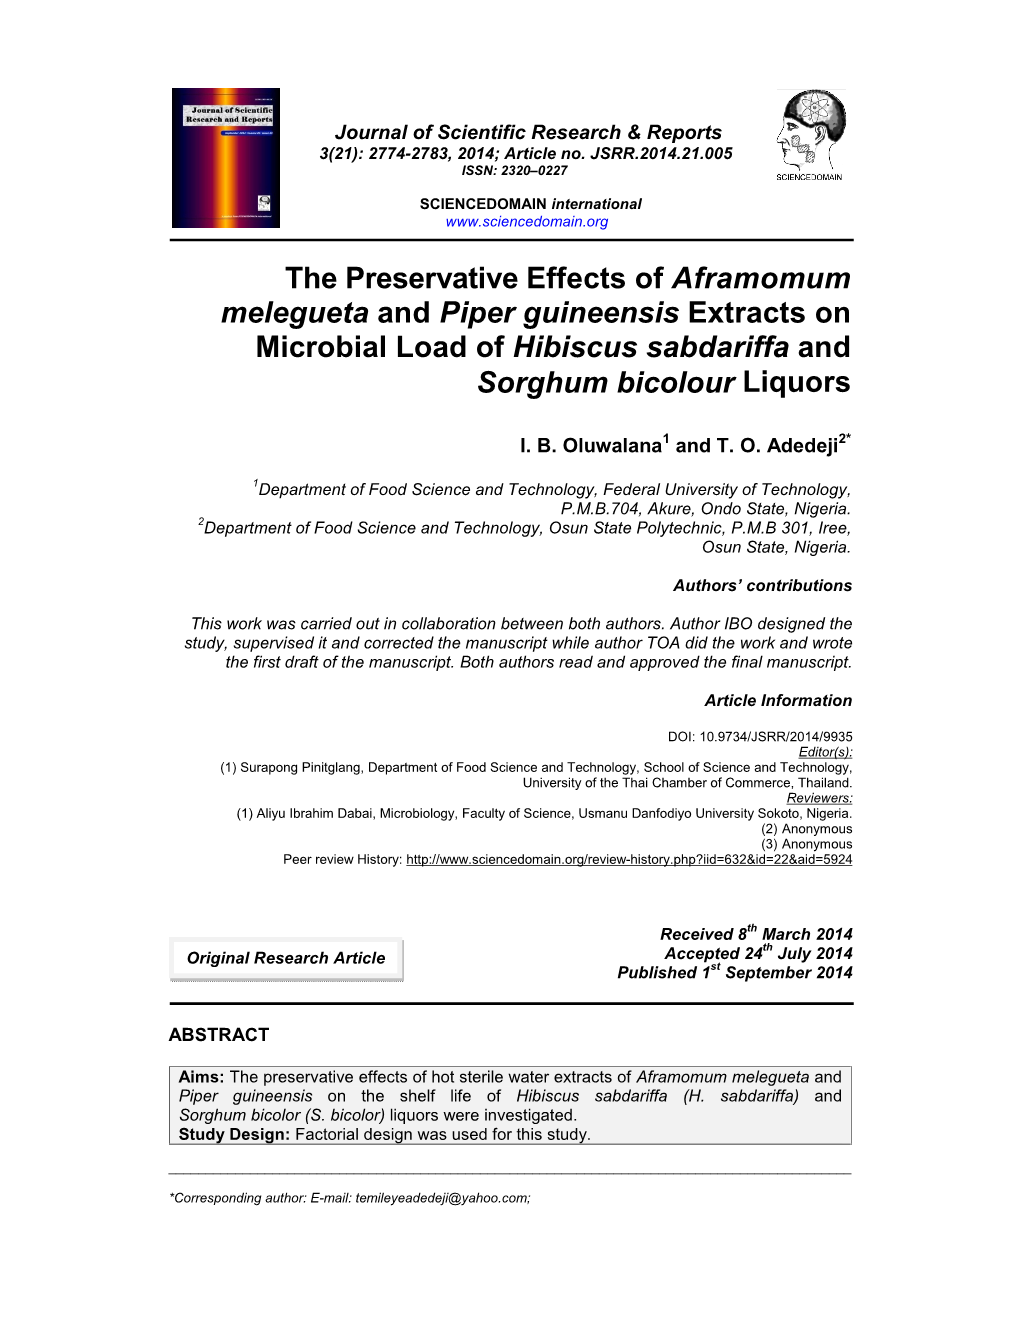 The Preservative Effects of Aframomum Melegueta and Piper Guineensis Extracts on Microbial Load of Hibiscus Sabdariffa and Sorghum Bicolour Liquors